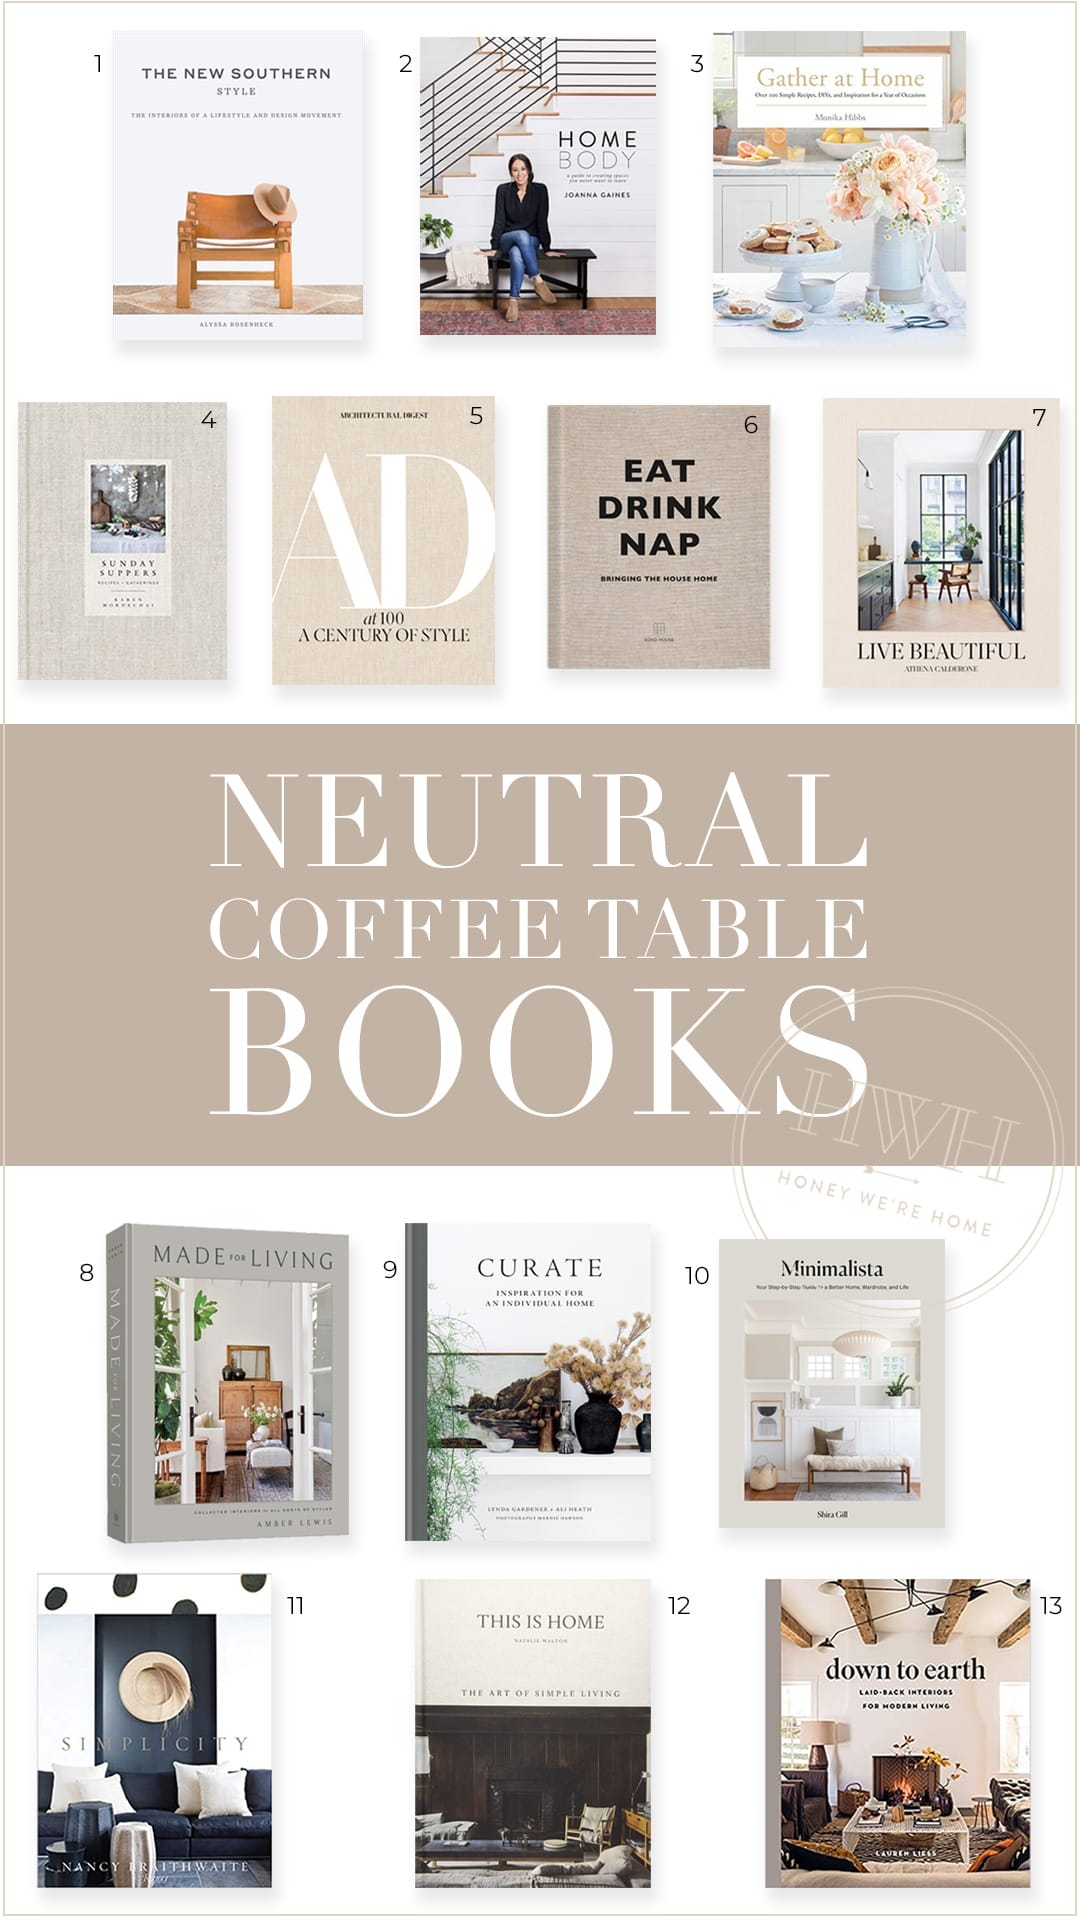 The Best Neutral Coffee Table Books to Accent Your Home